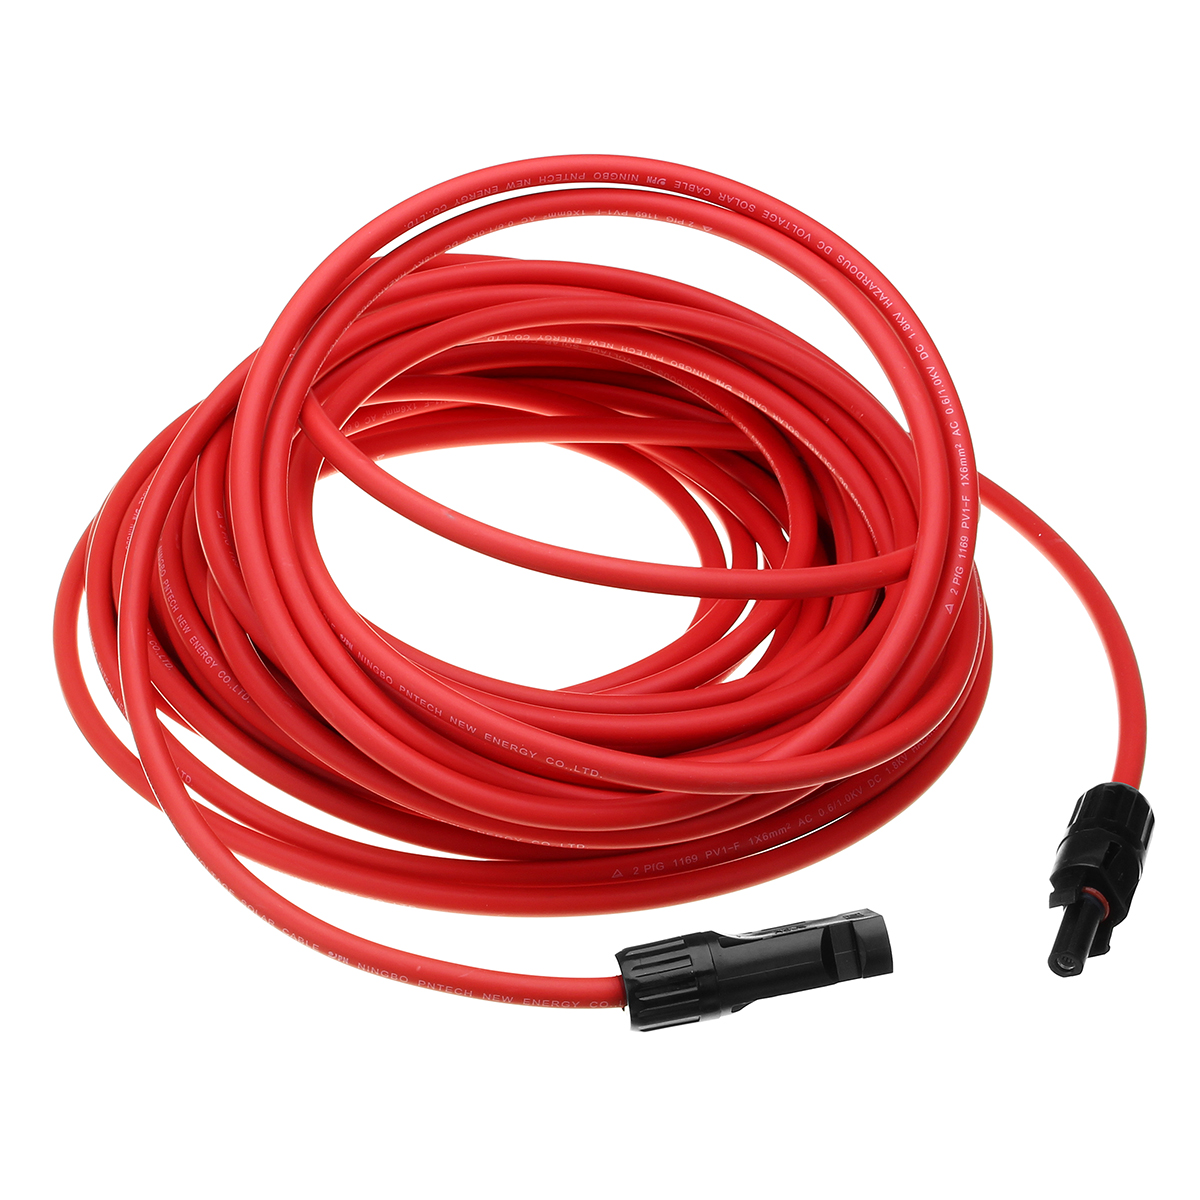 10-AWG-15-Meter-Solar-Panel-Extension-Cable-Wire-BlackRed-with-MC4-Connectors-1338753-5